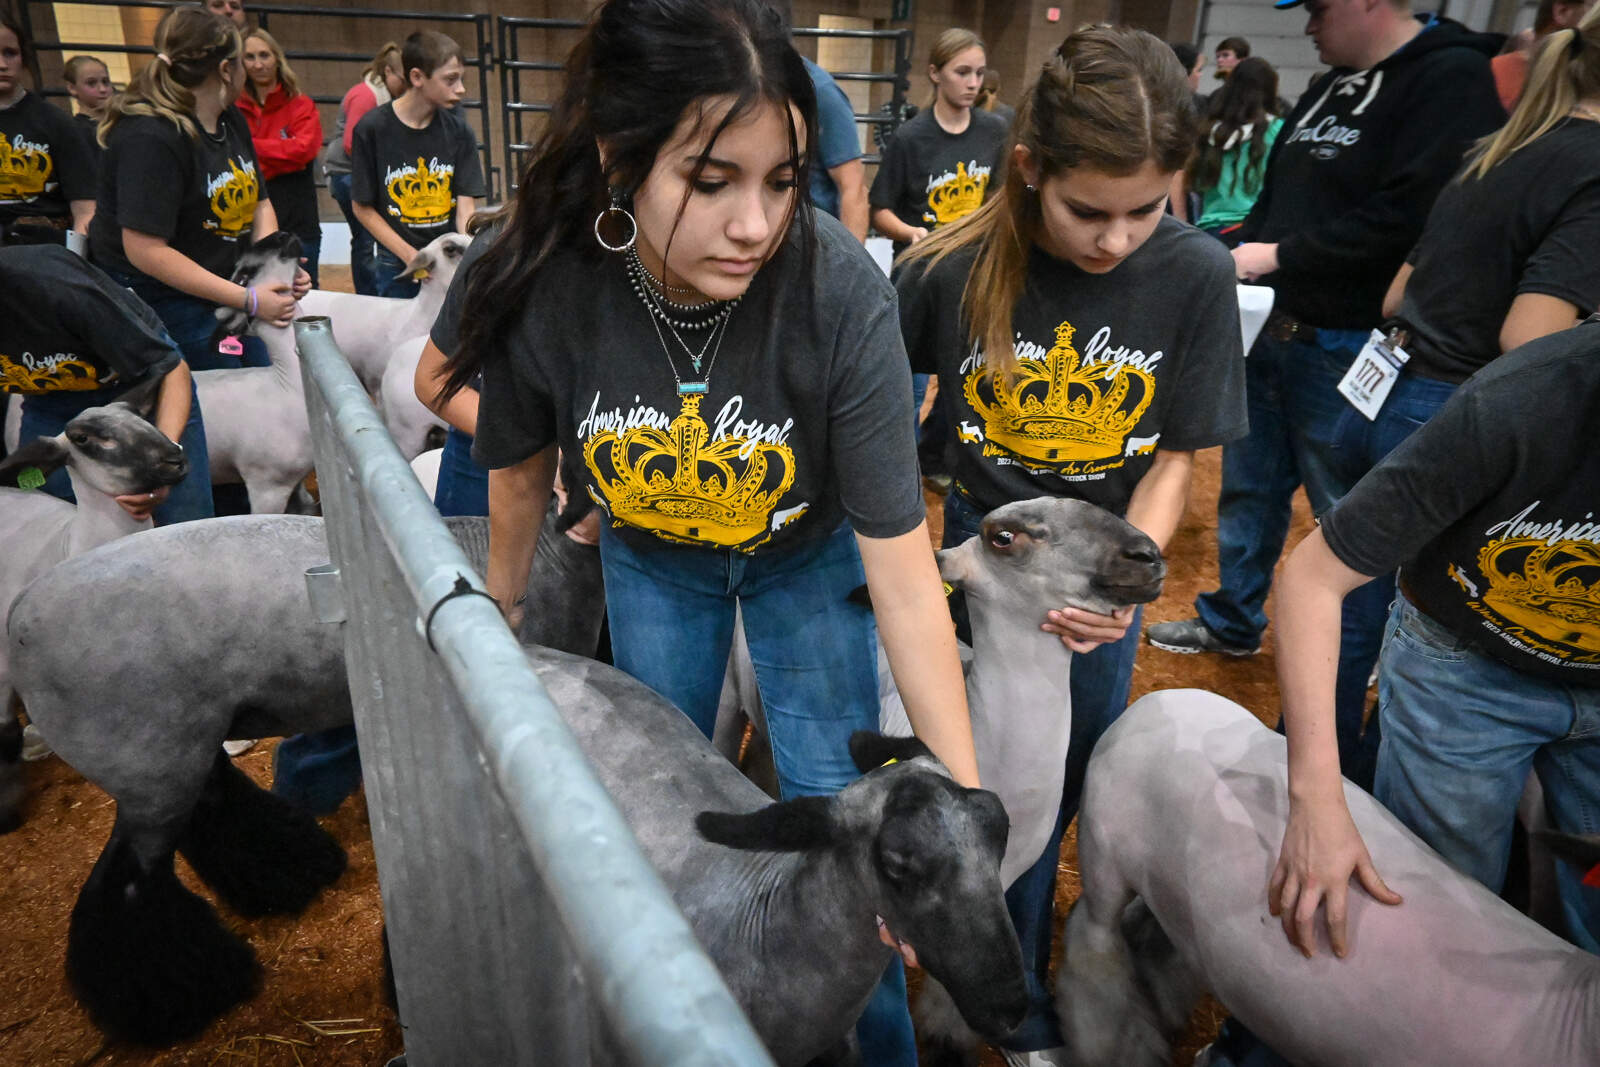 It's best in show for kids and their animals at the American Royal